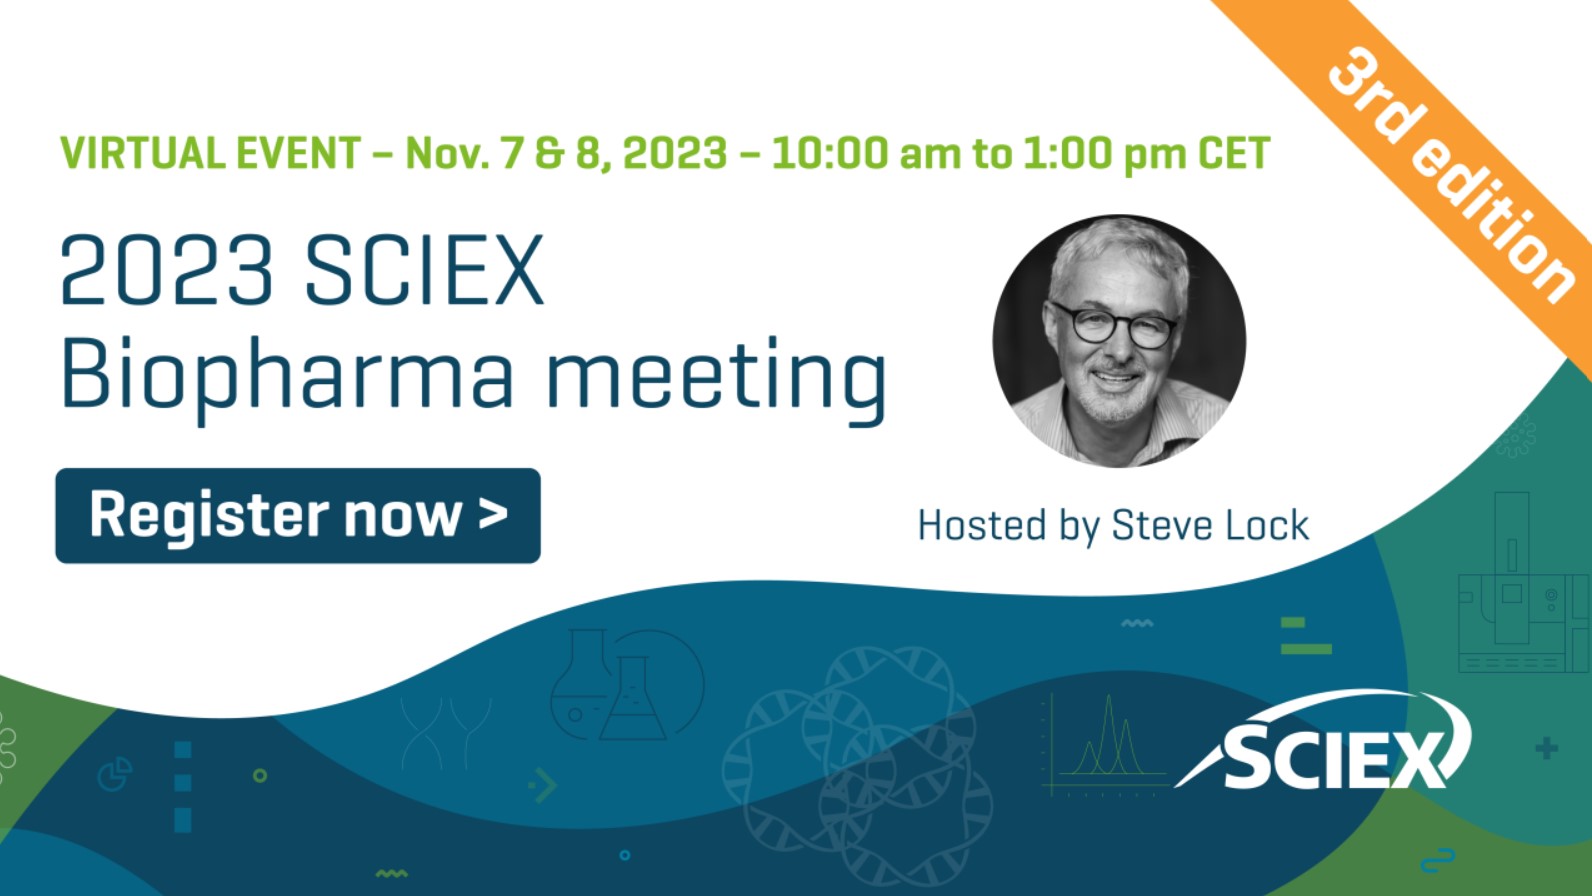 SCIEX: SCIEX Biopharma meeting - 3rd edition! Day 2 - Therapeutic proteins and peptides